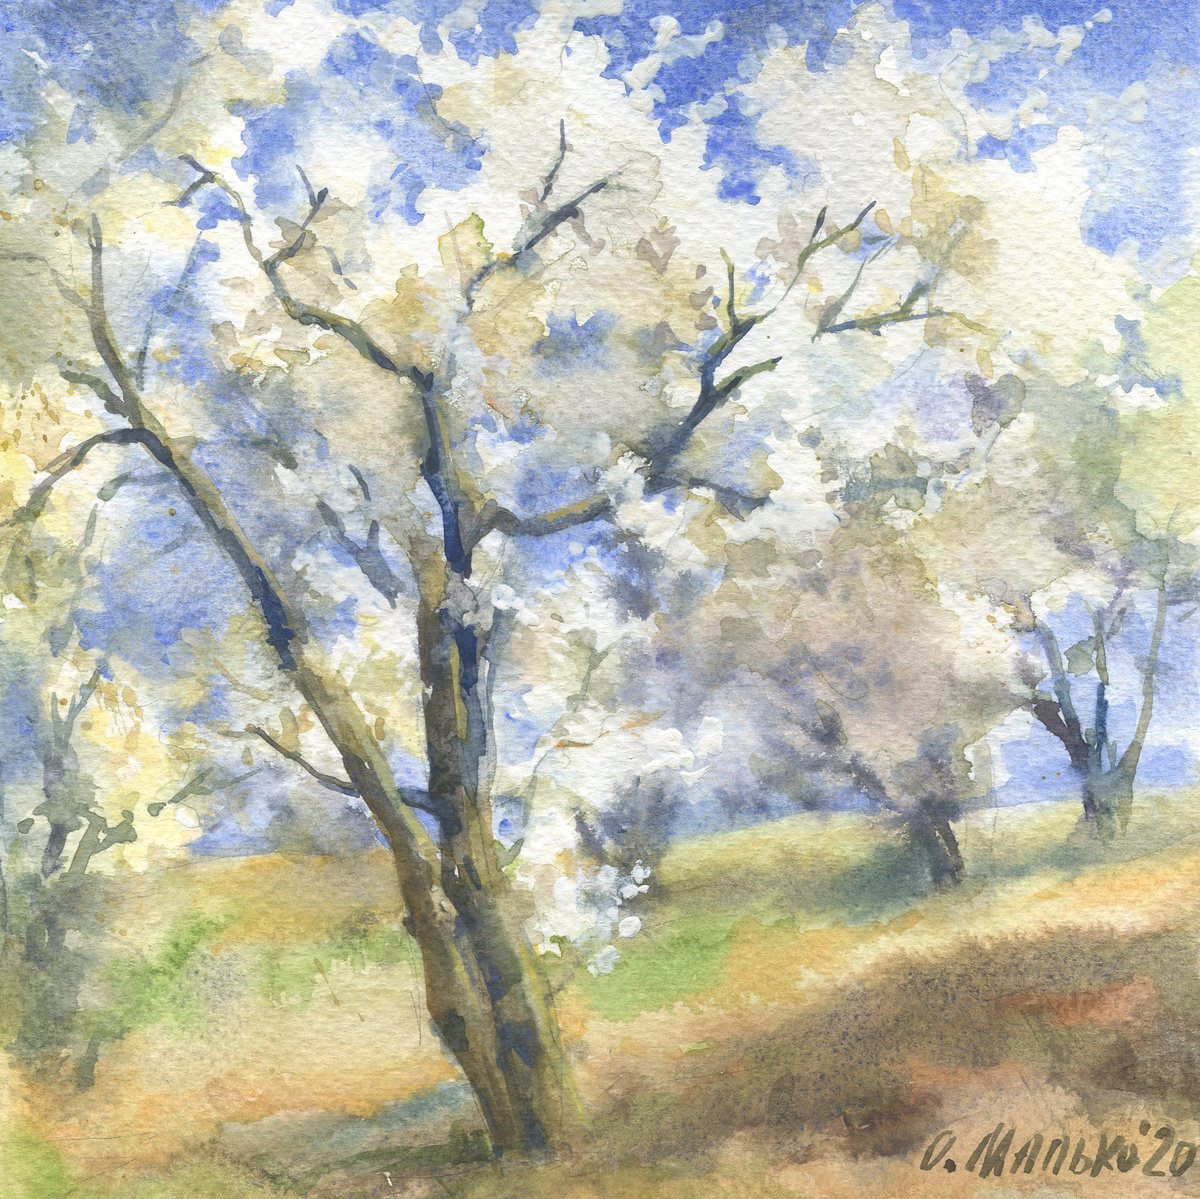 Flowering orchard / White trees and blue sky Spring watercolor sketch by Olha Malko